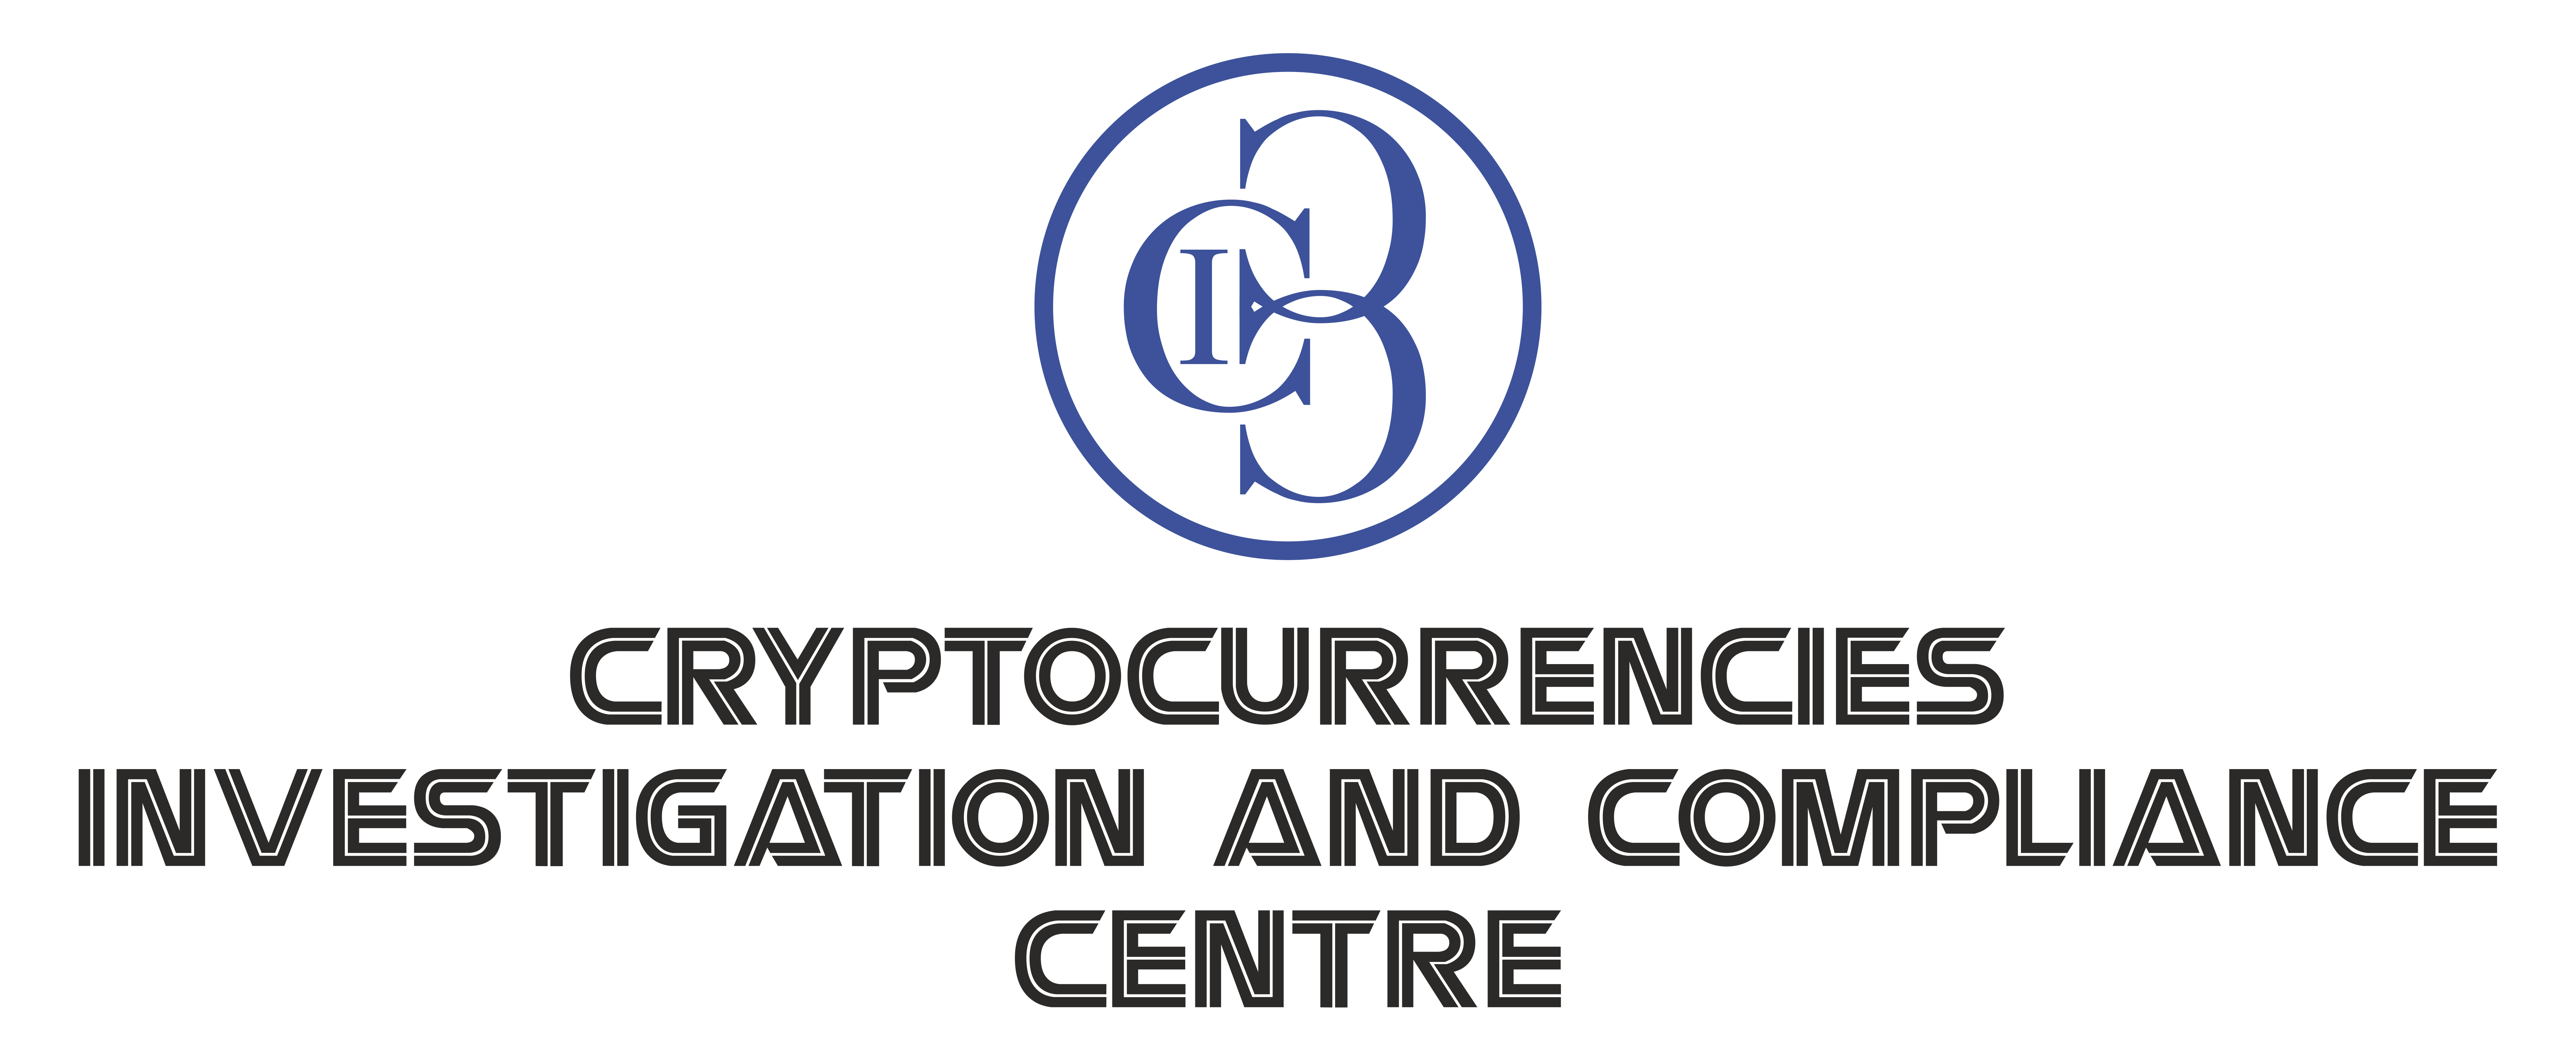 Cryptocurrencies Investigation and Compliance Centre – CICC